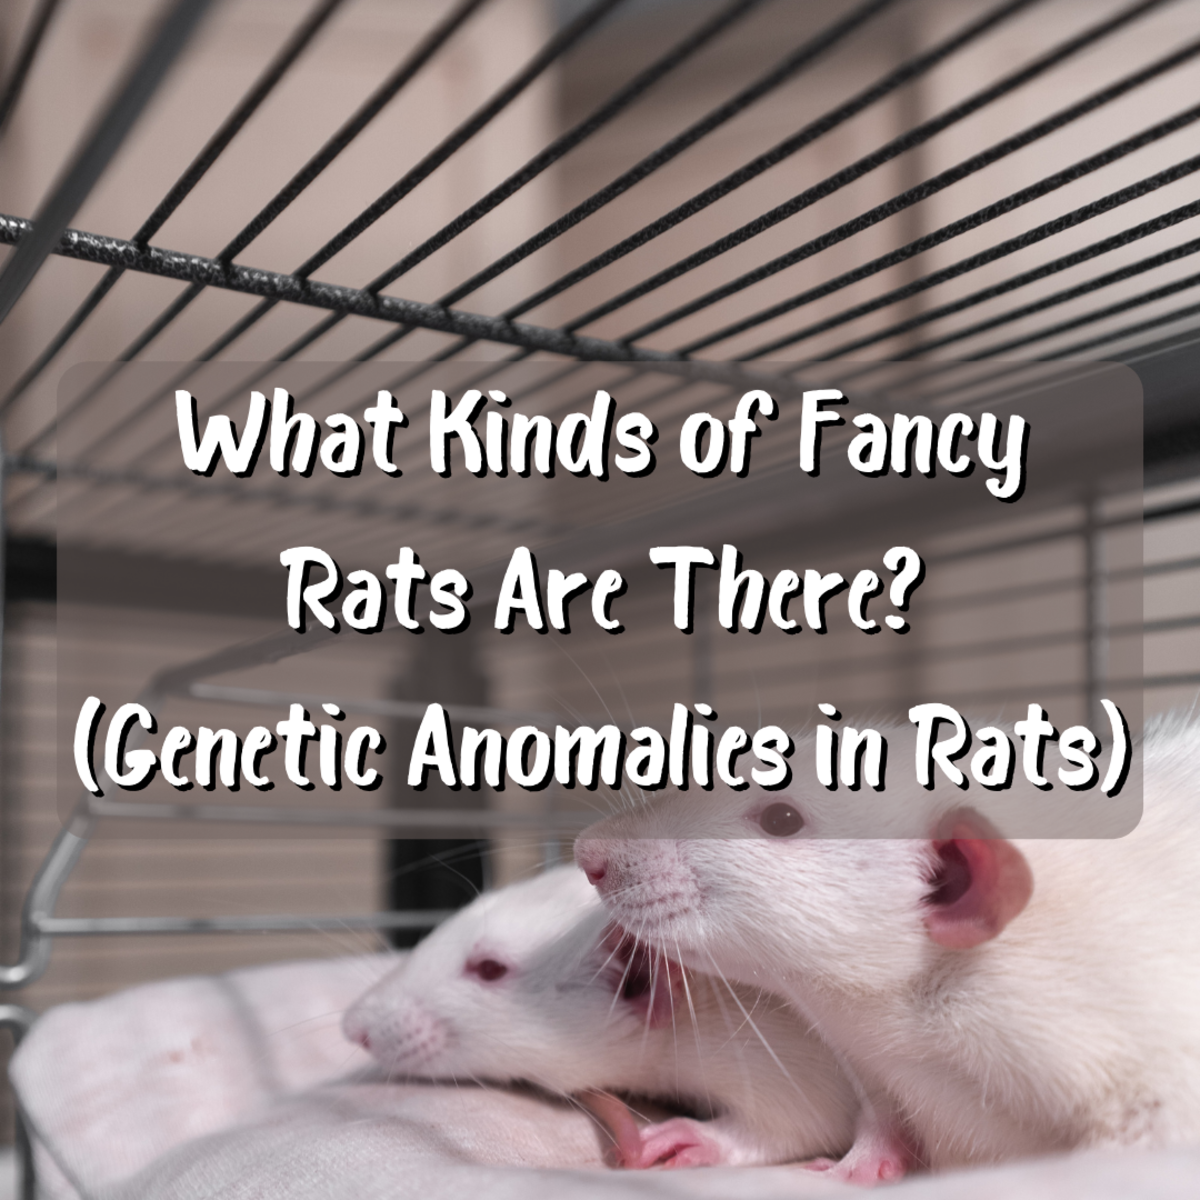 Read on to learn about all the varieties of fancy rats, including those bred exclusively for laboratory settings.